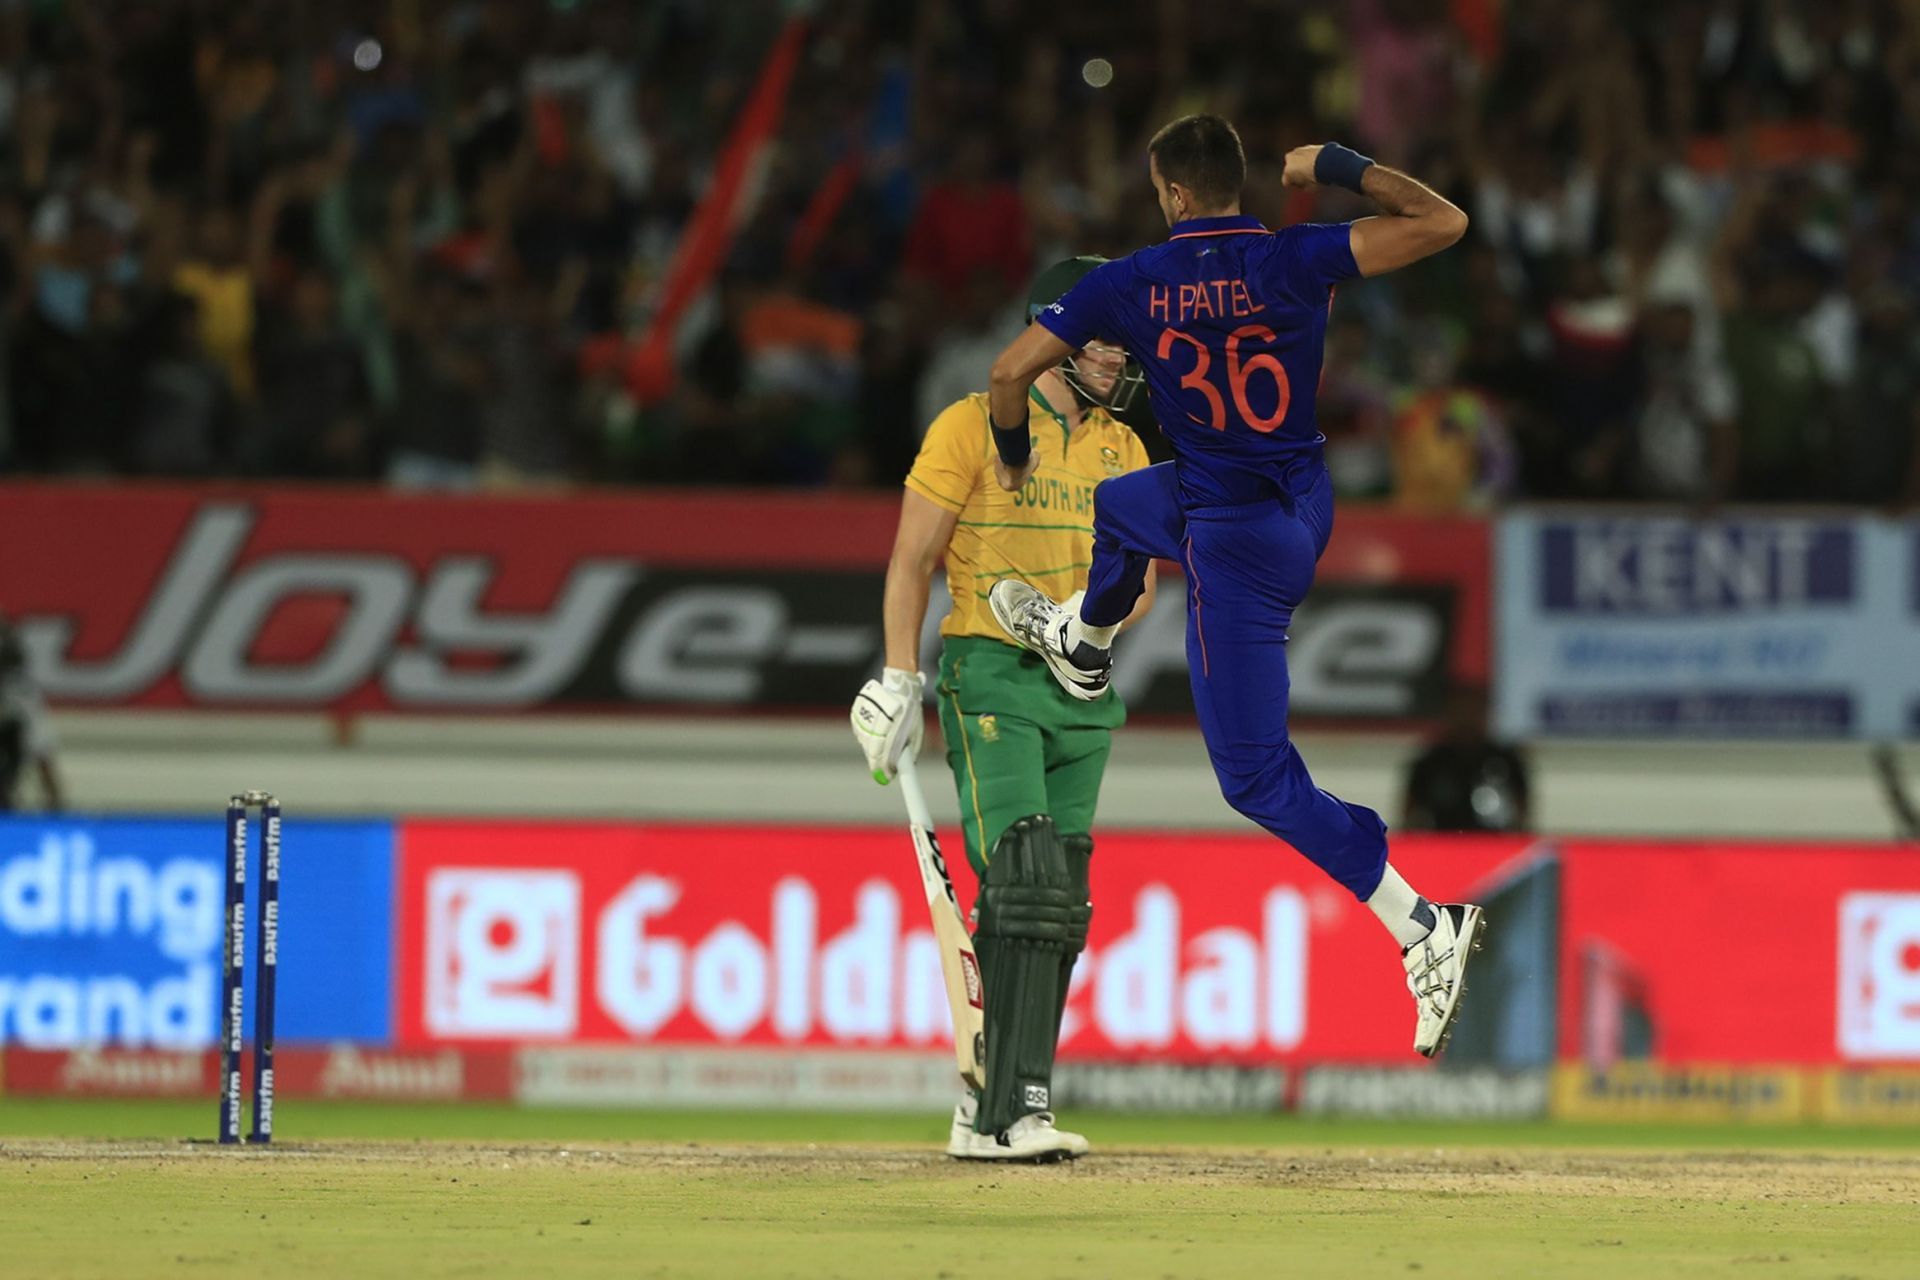 Harshal Patel was the highest wicket-taker in the India-South Africa series